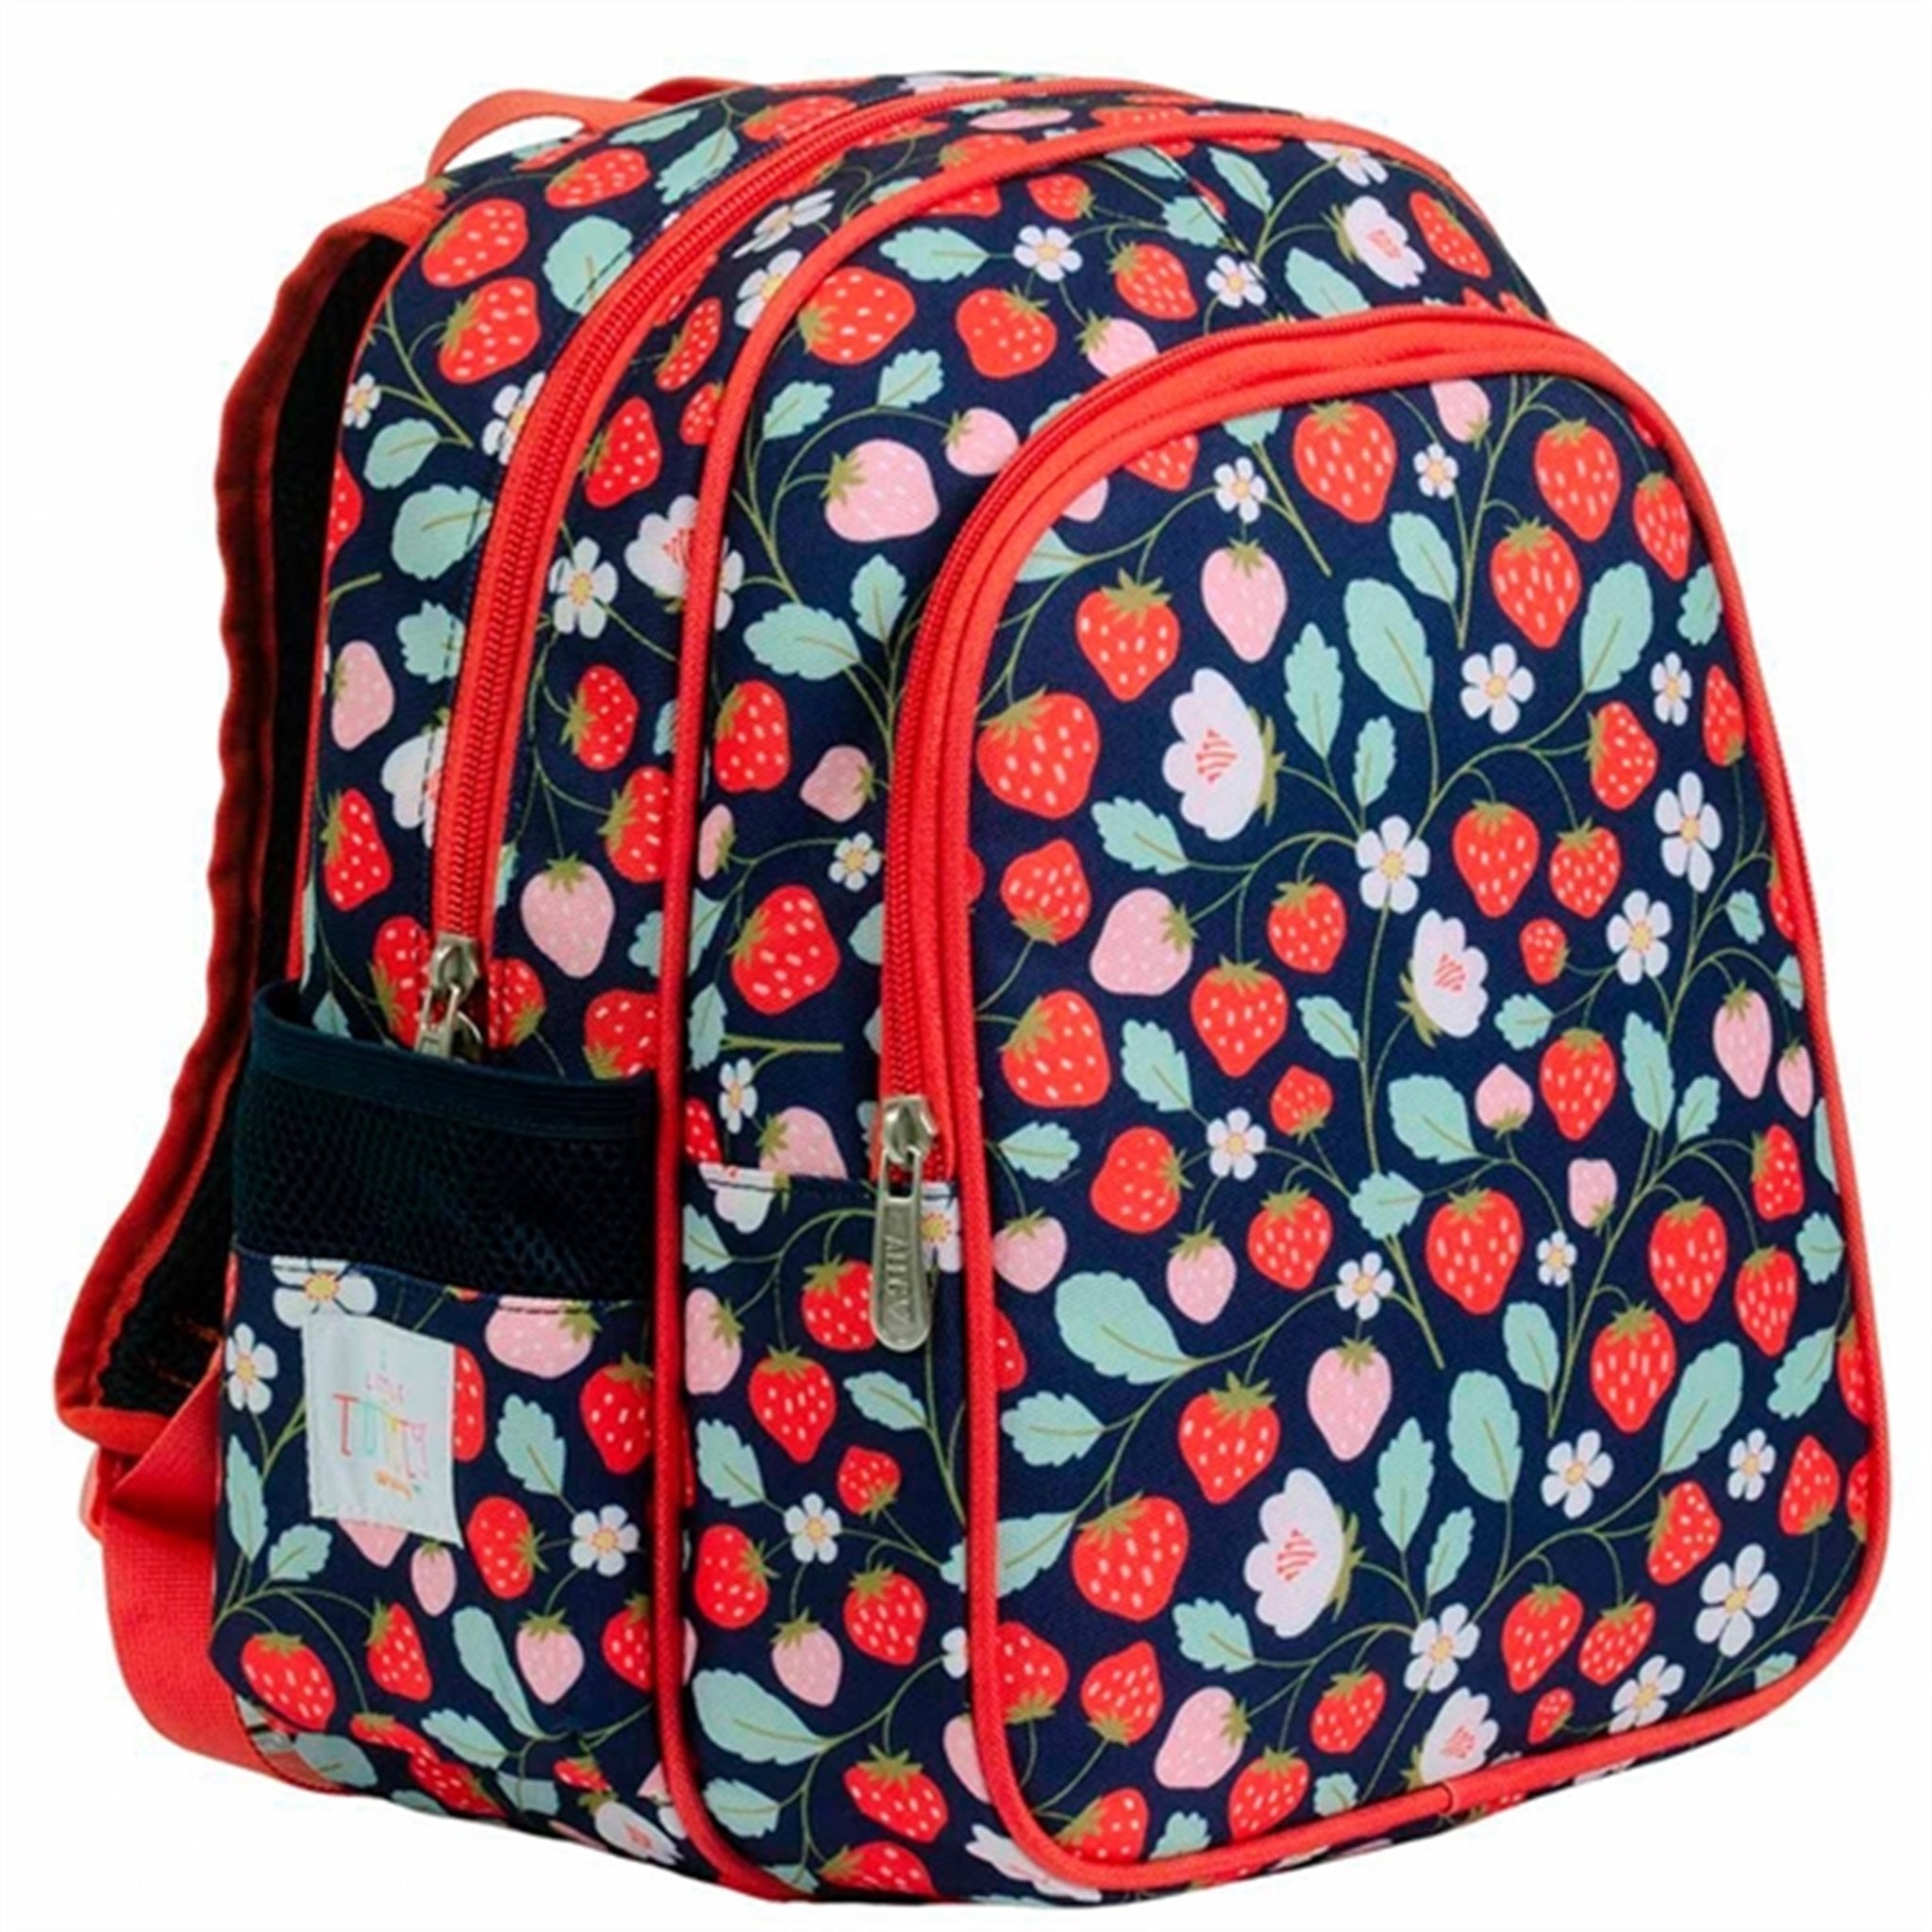 A Little Lovely Company Backpack Strawberries 4